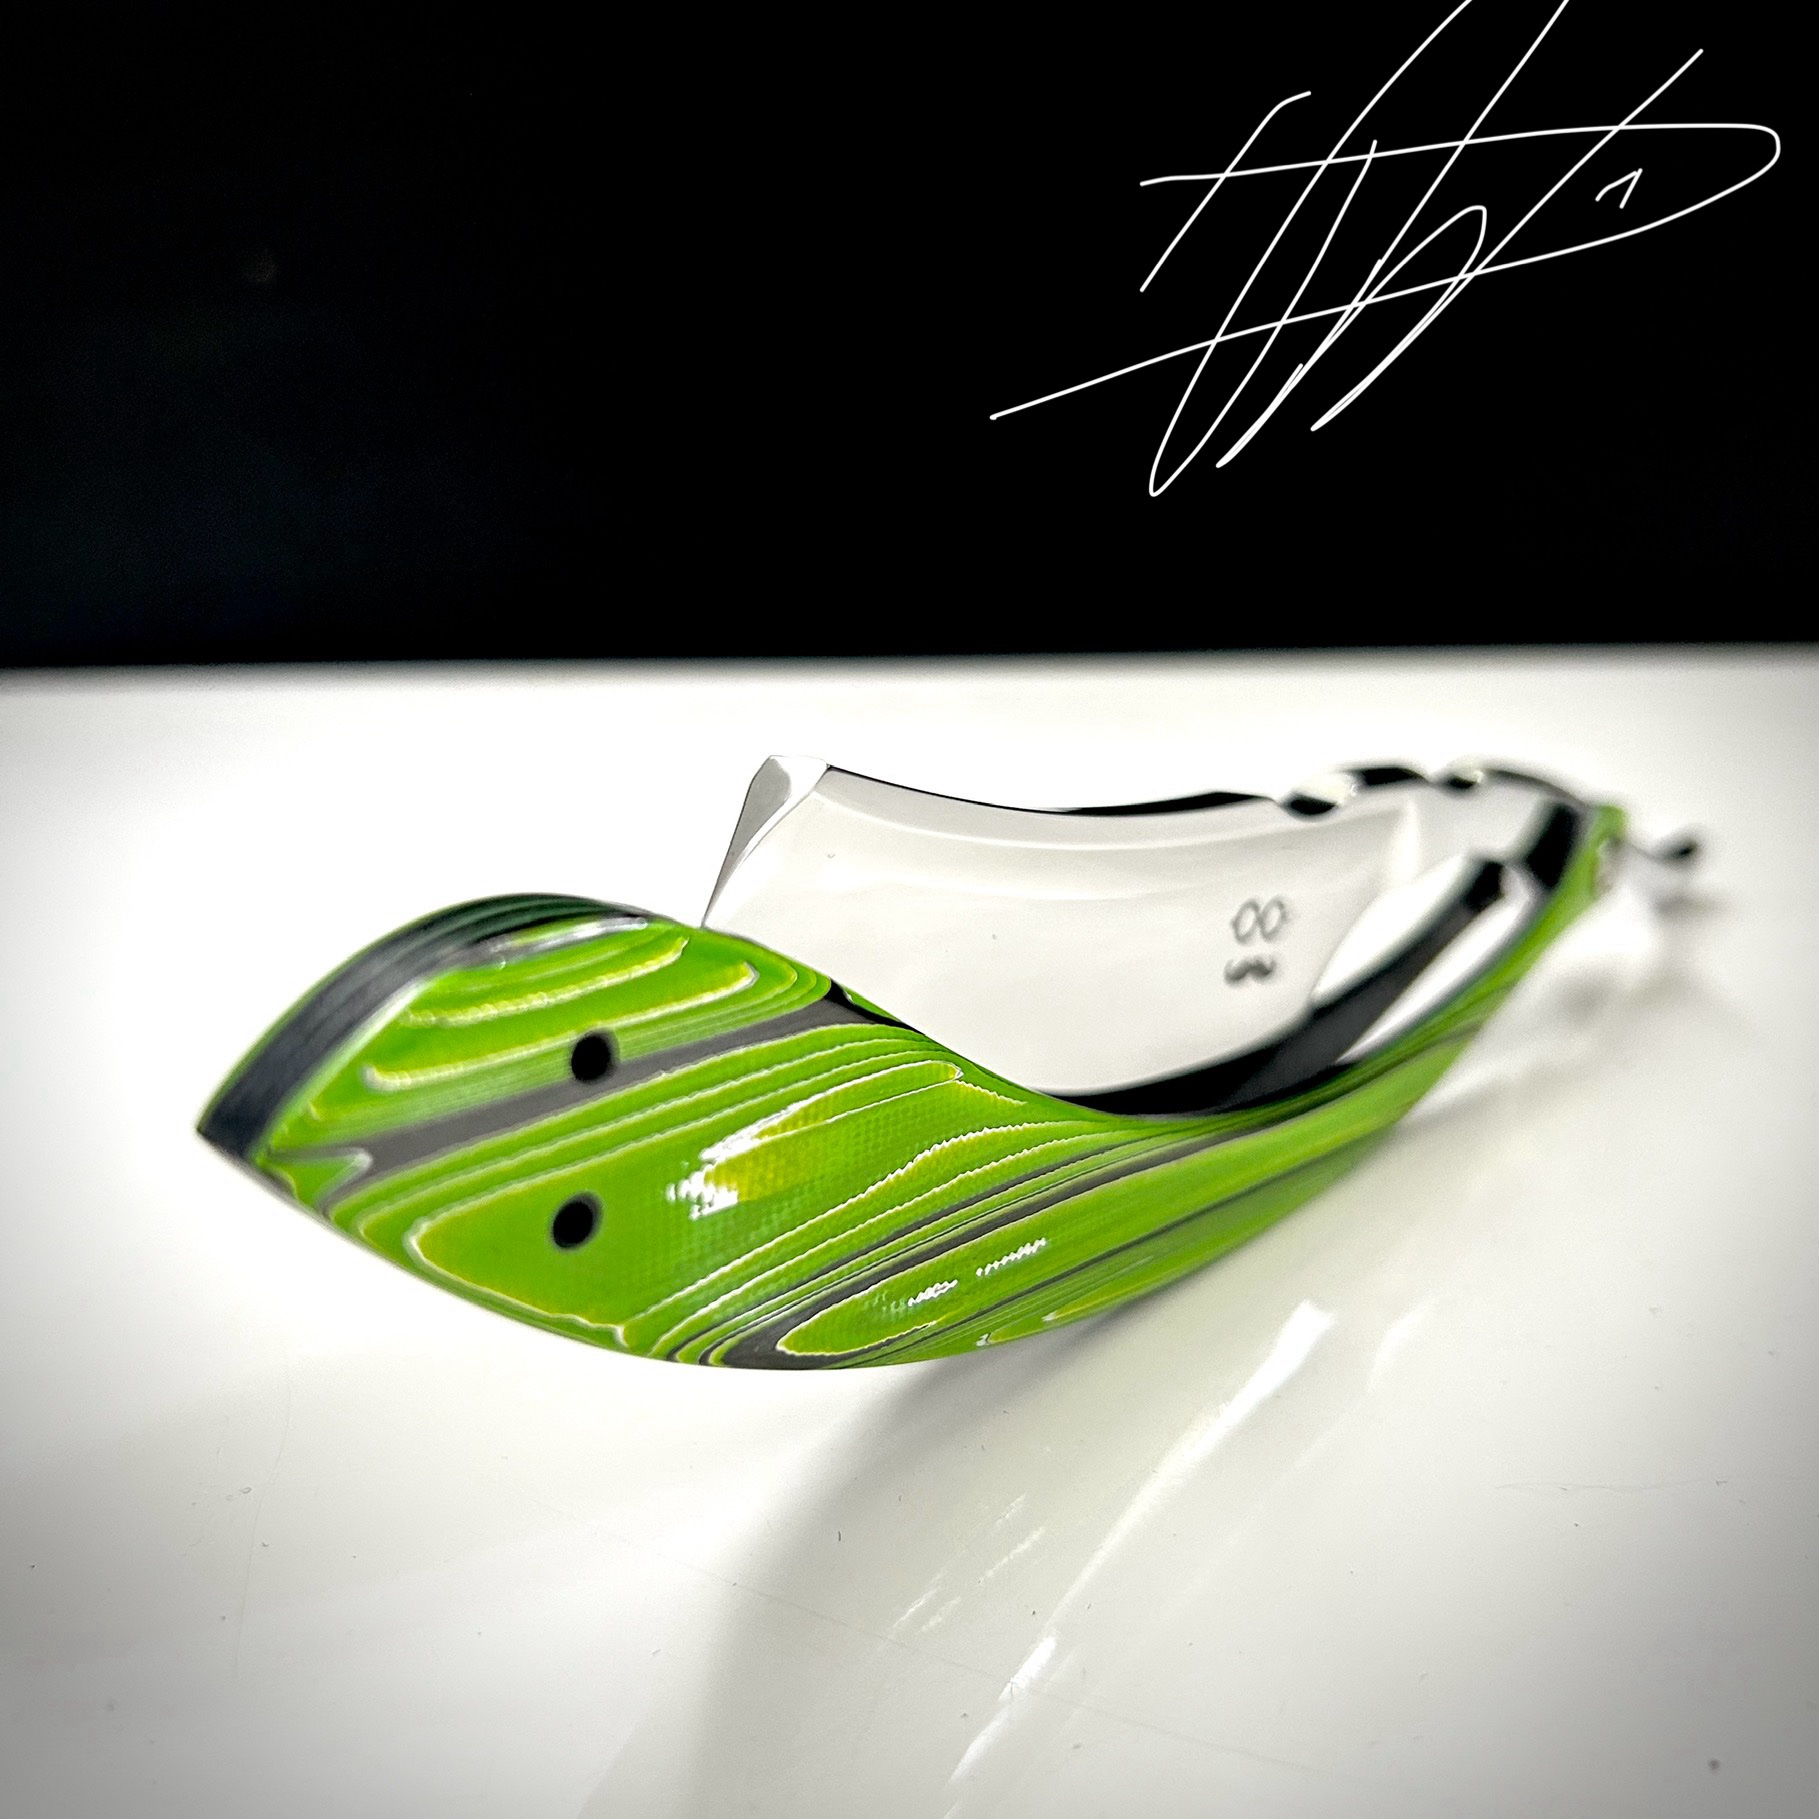 Woolfblades 383 Custom Made in a RWL 34 mirror chrome polish and full hollow grind 6/8 And the scales are made in a Green Carbon fibre with carbon fibre inlays and carbon fibre pin